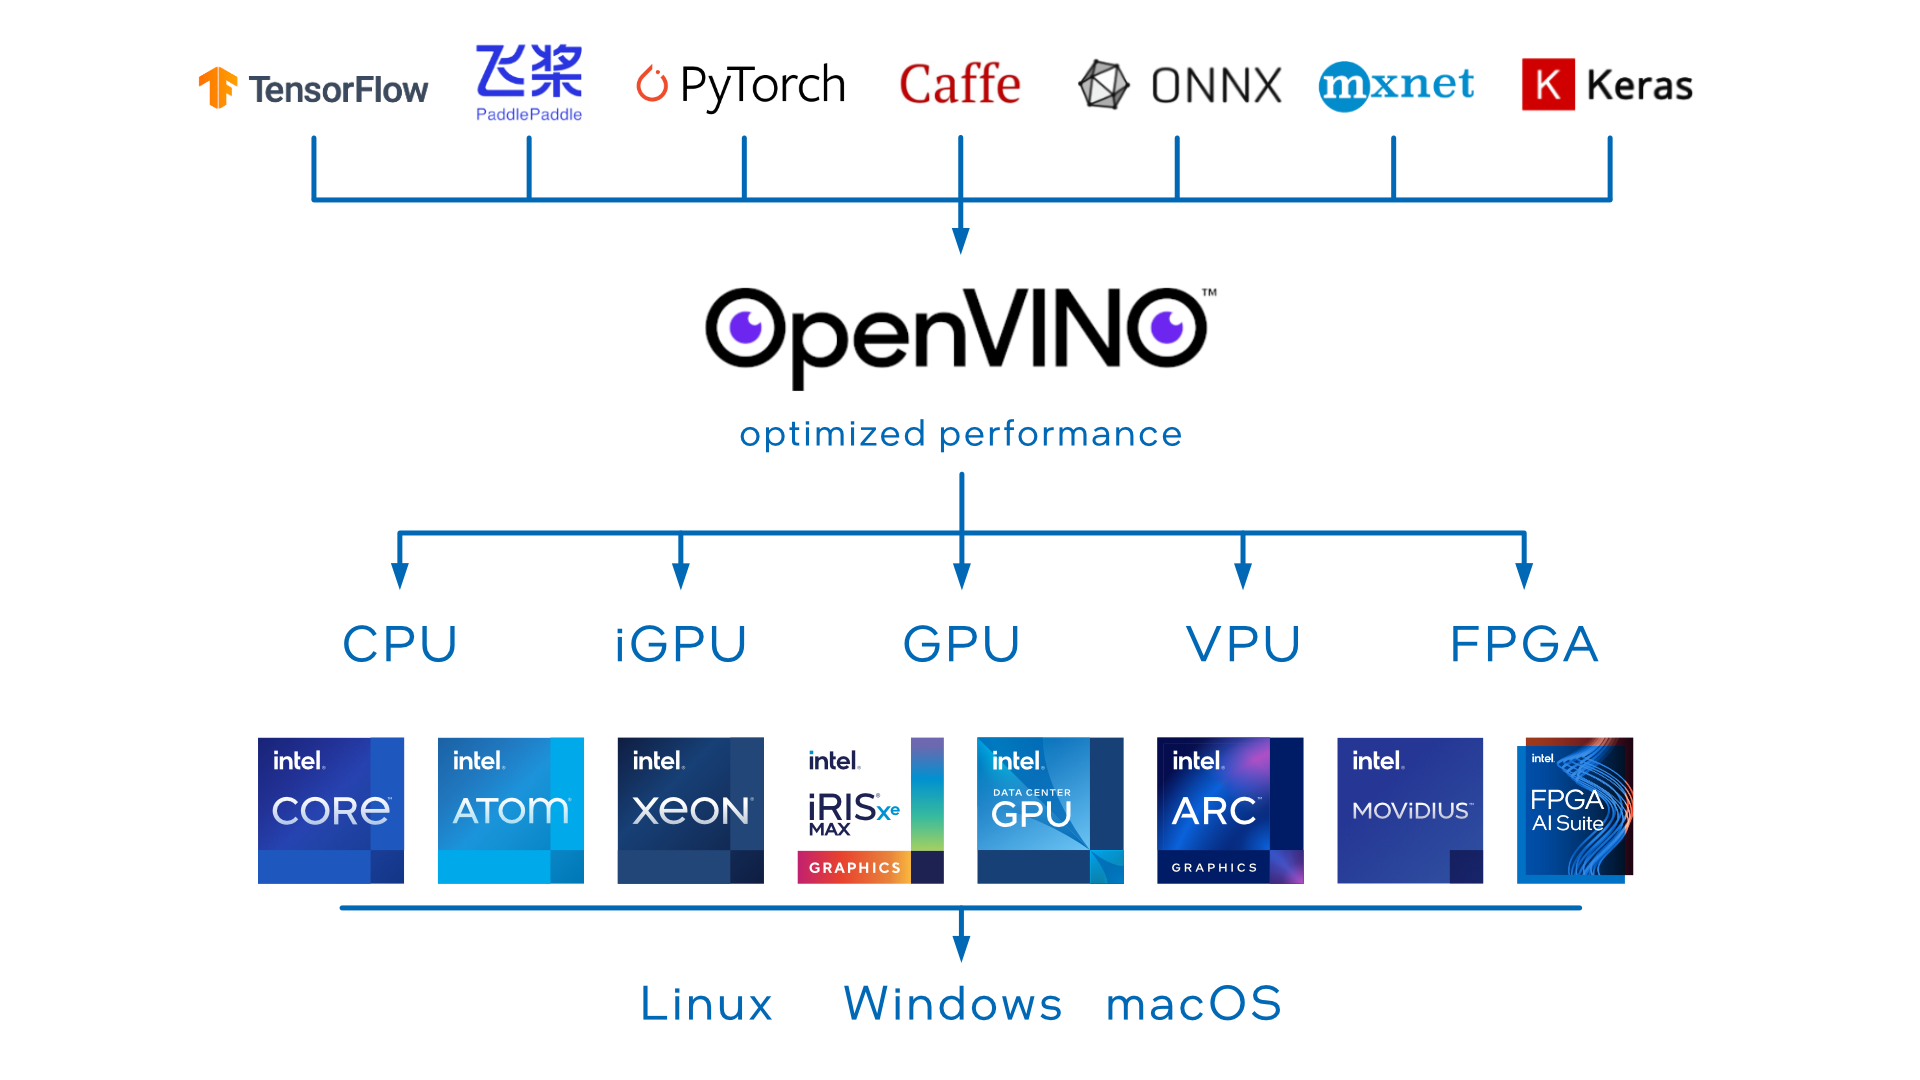 OpenVINO allows to process models built with Caffe, Keras, mxnet, TensorFlow, ONNX, and PyTorch. They can be easily optimized and deployed on devices running Windows, Linux, or MacOS.